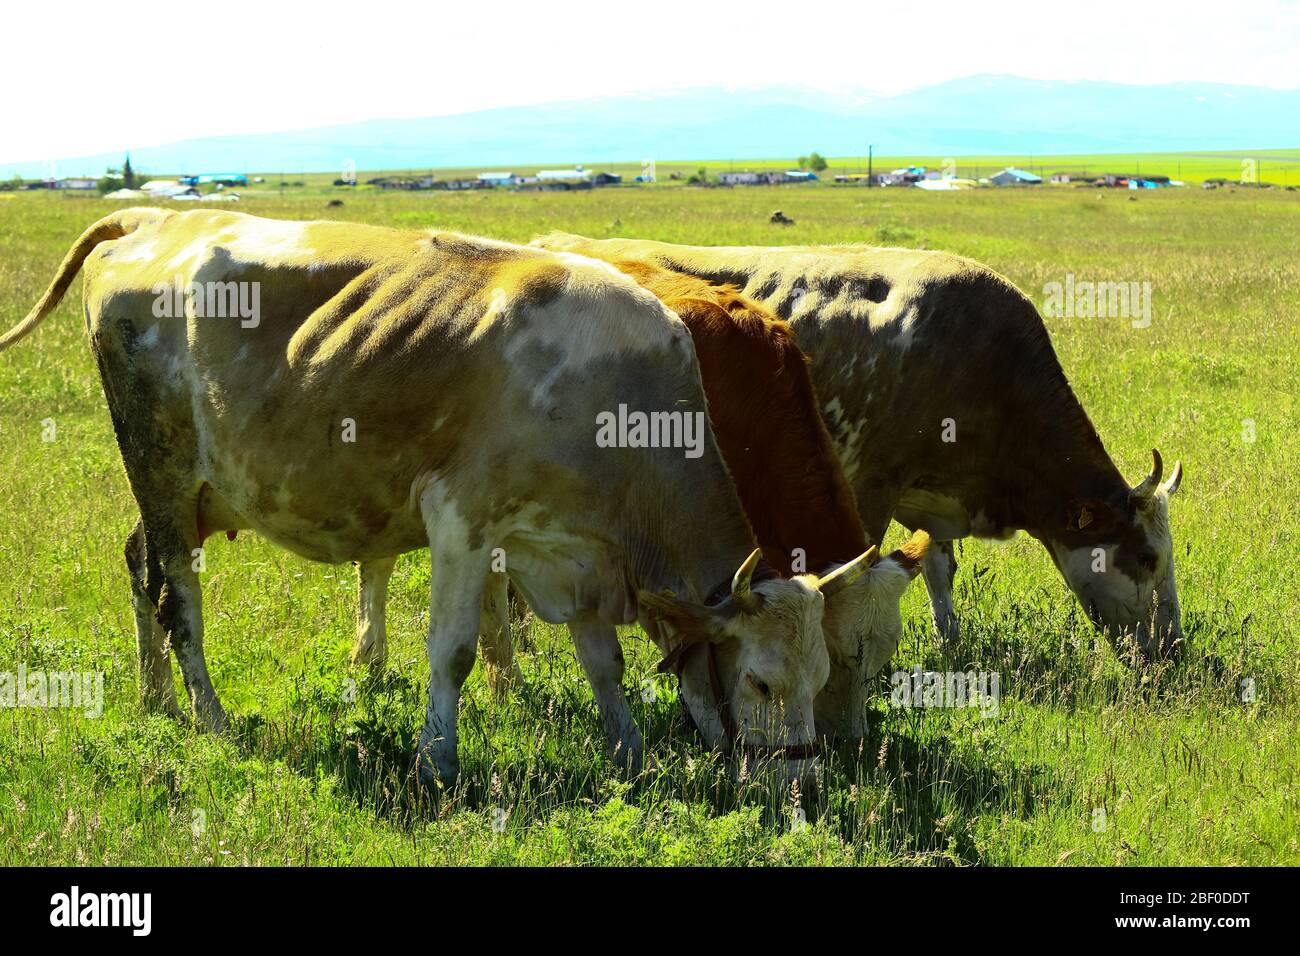 3 bulls grazing next to each other. Lush pasture field and Angle in the air on a sunny day. Stock Photo